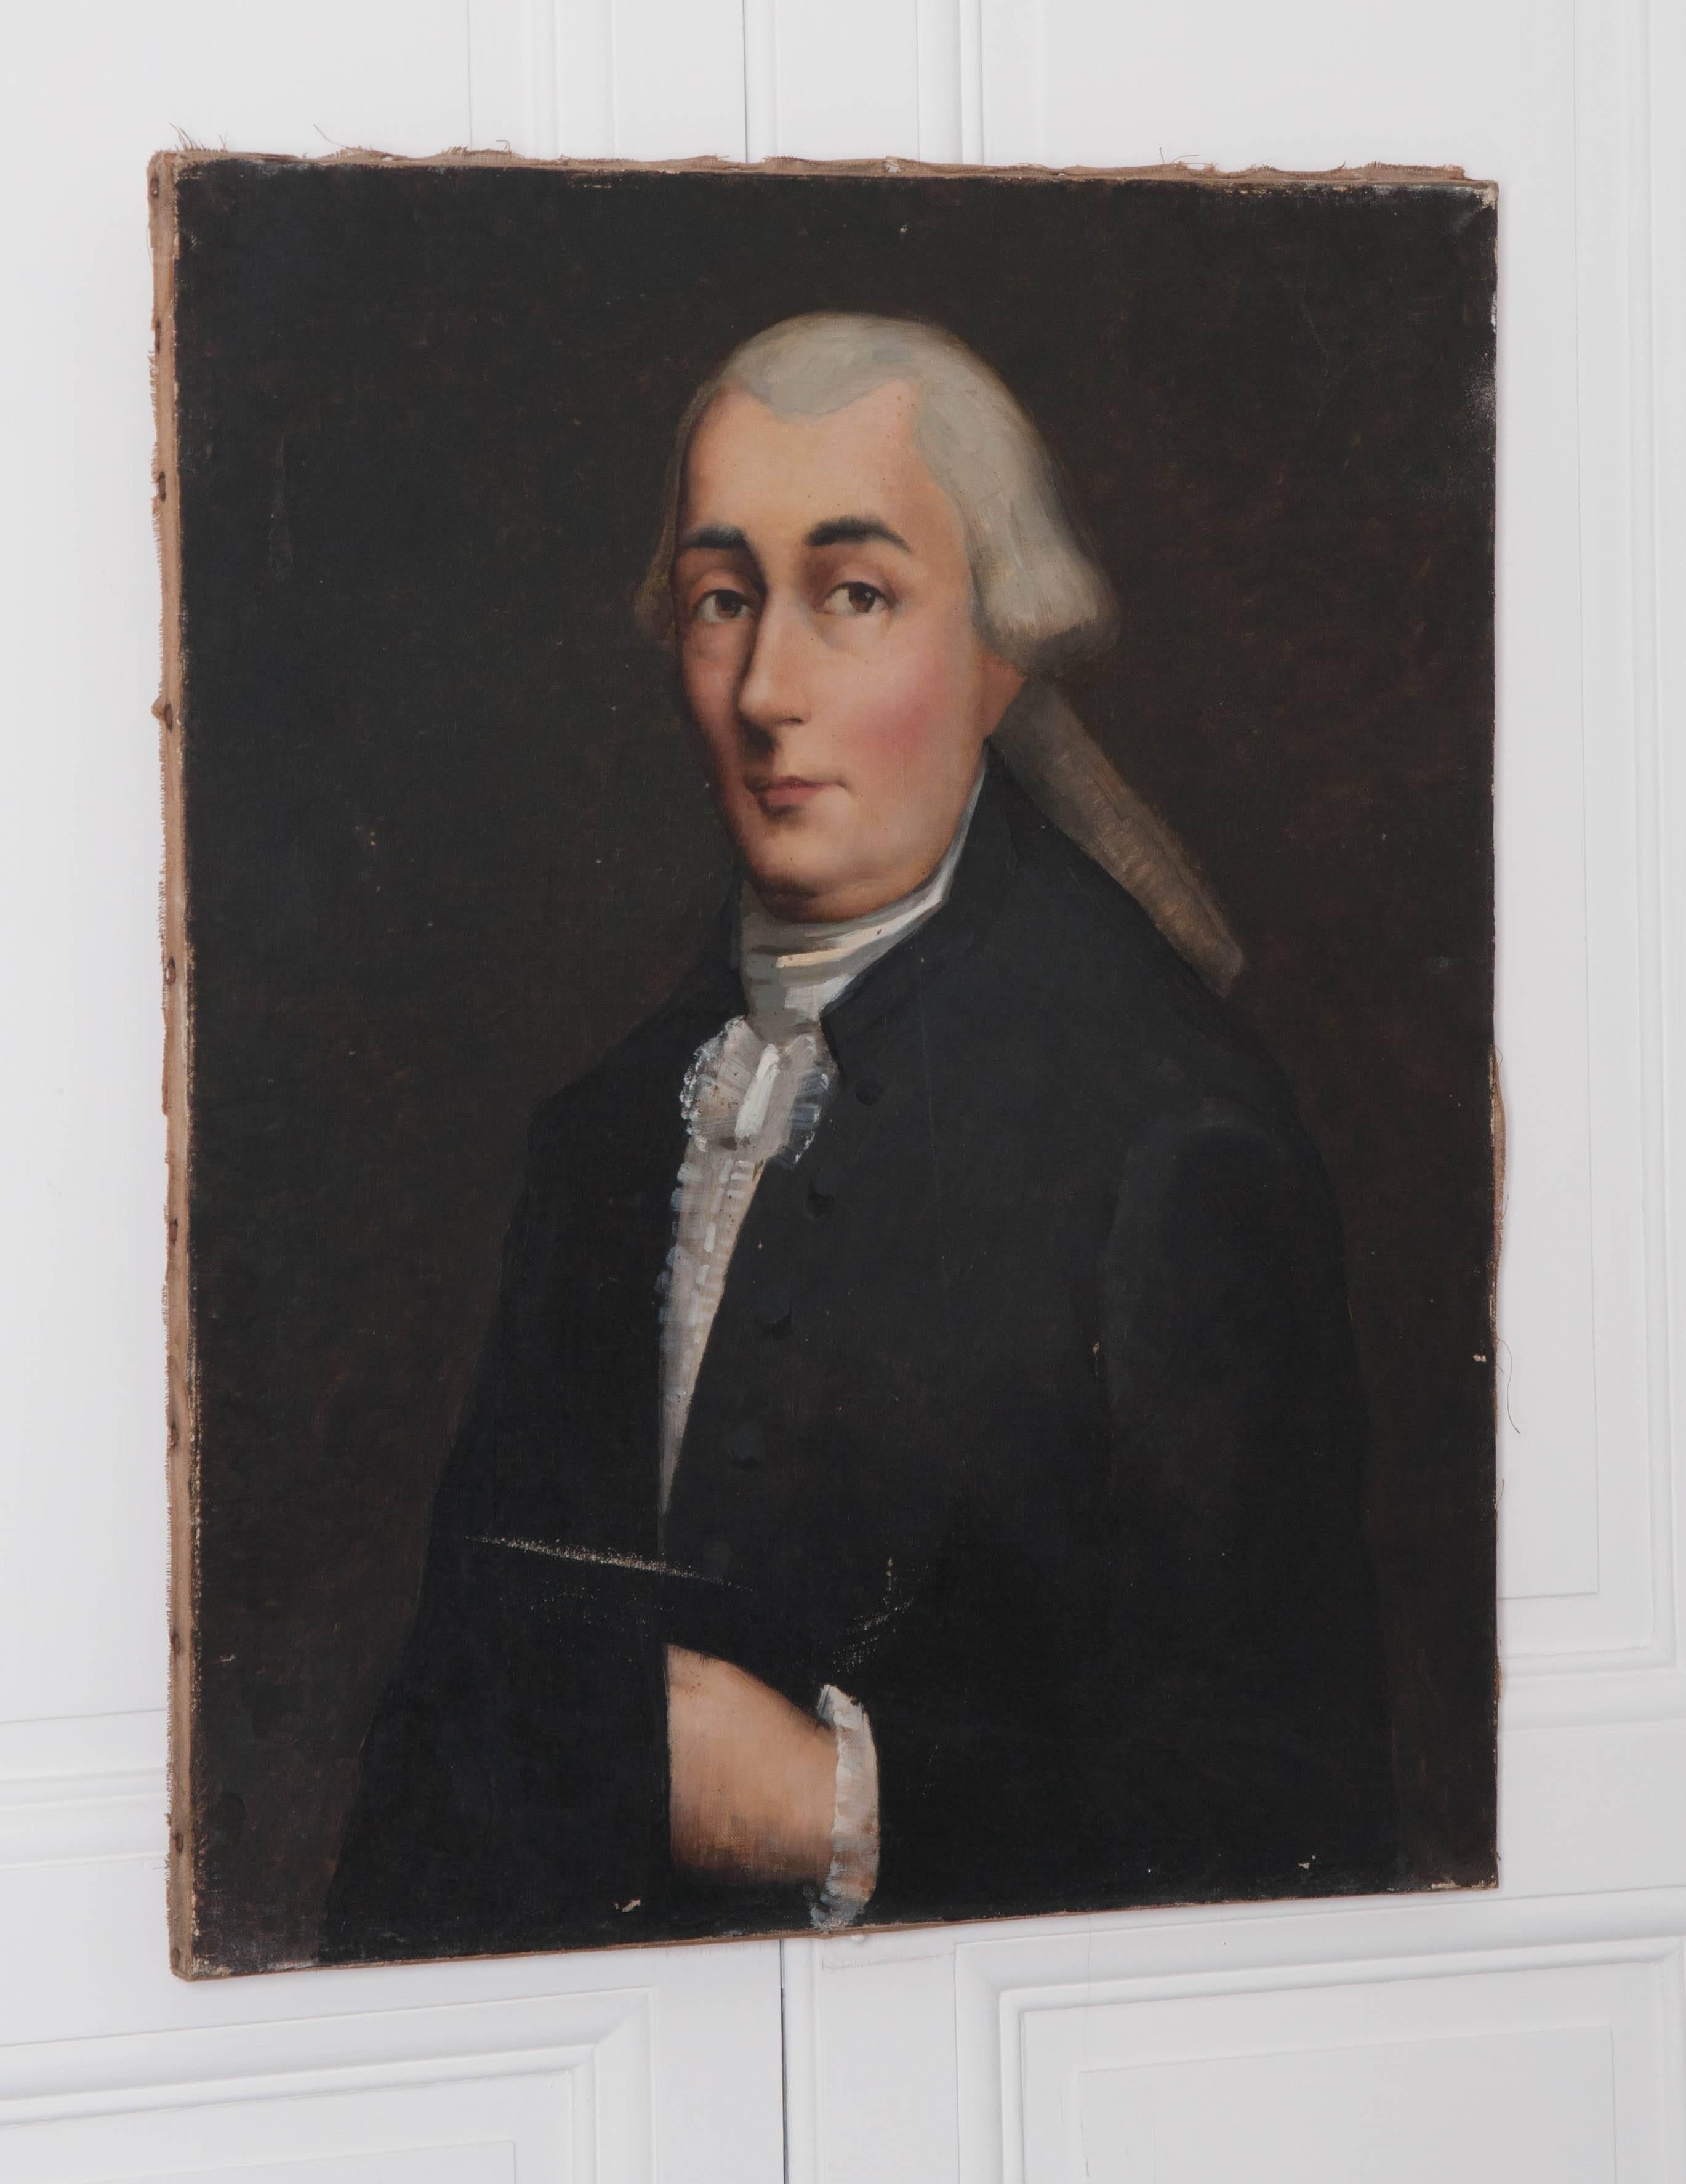 A French portrait of a dapper gentleman wearing a powdered wig from the end of the 19th century. A sly smile is all the emotion you get from this reserved, stoic fellow. Antique portraits are a must for a well-executed gallery wall and this work